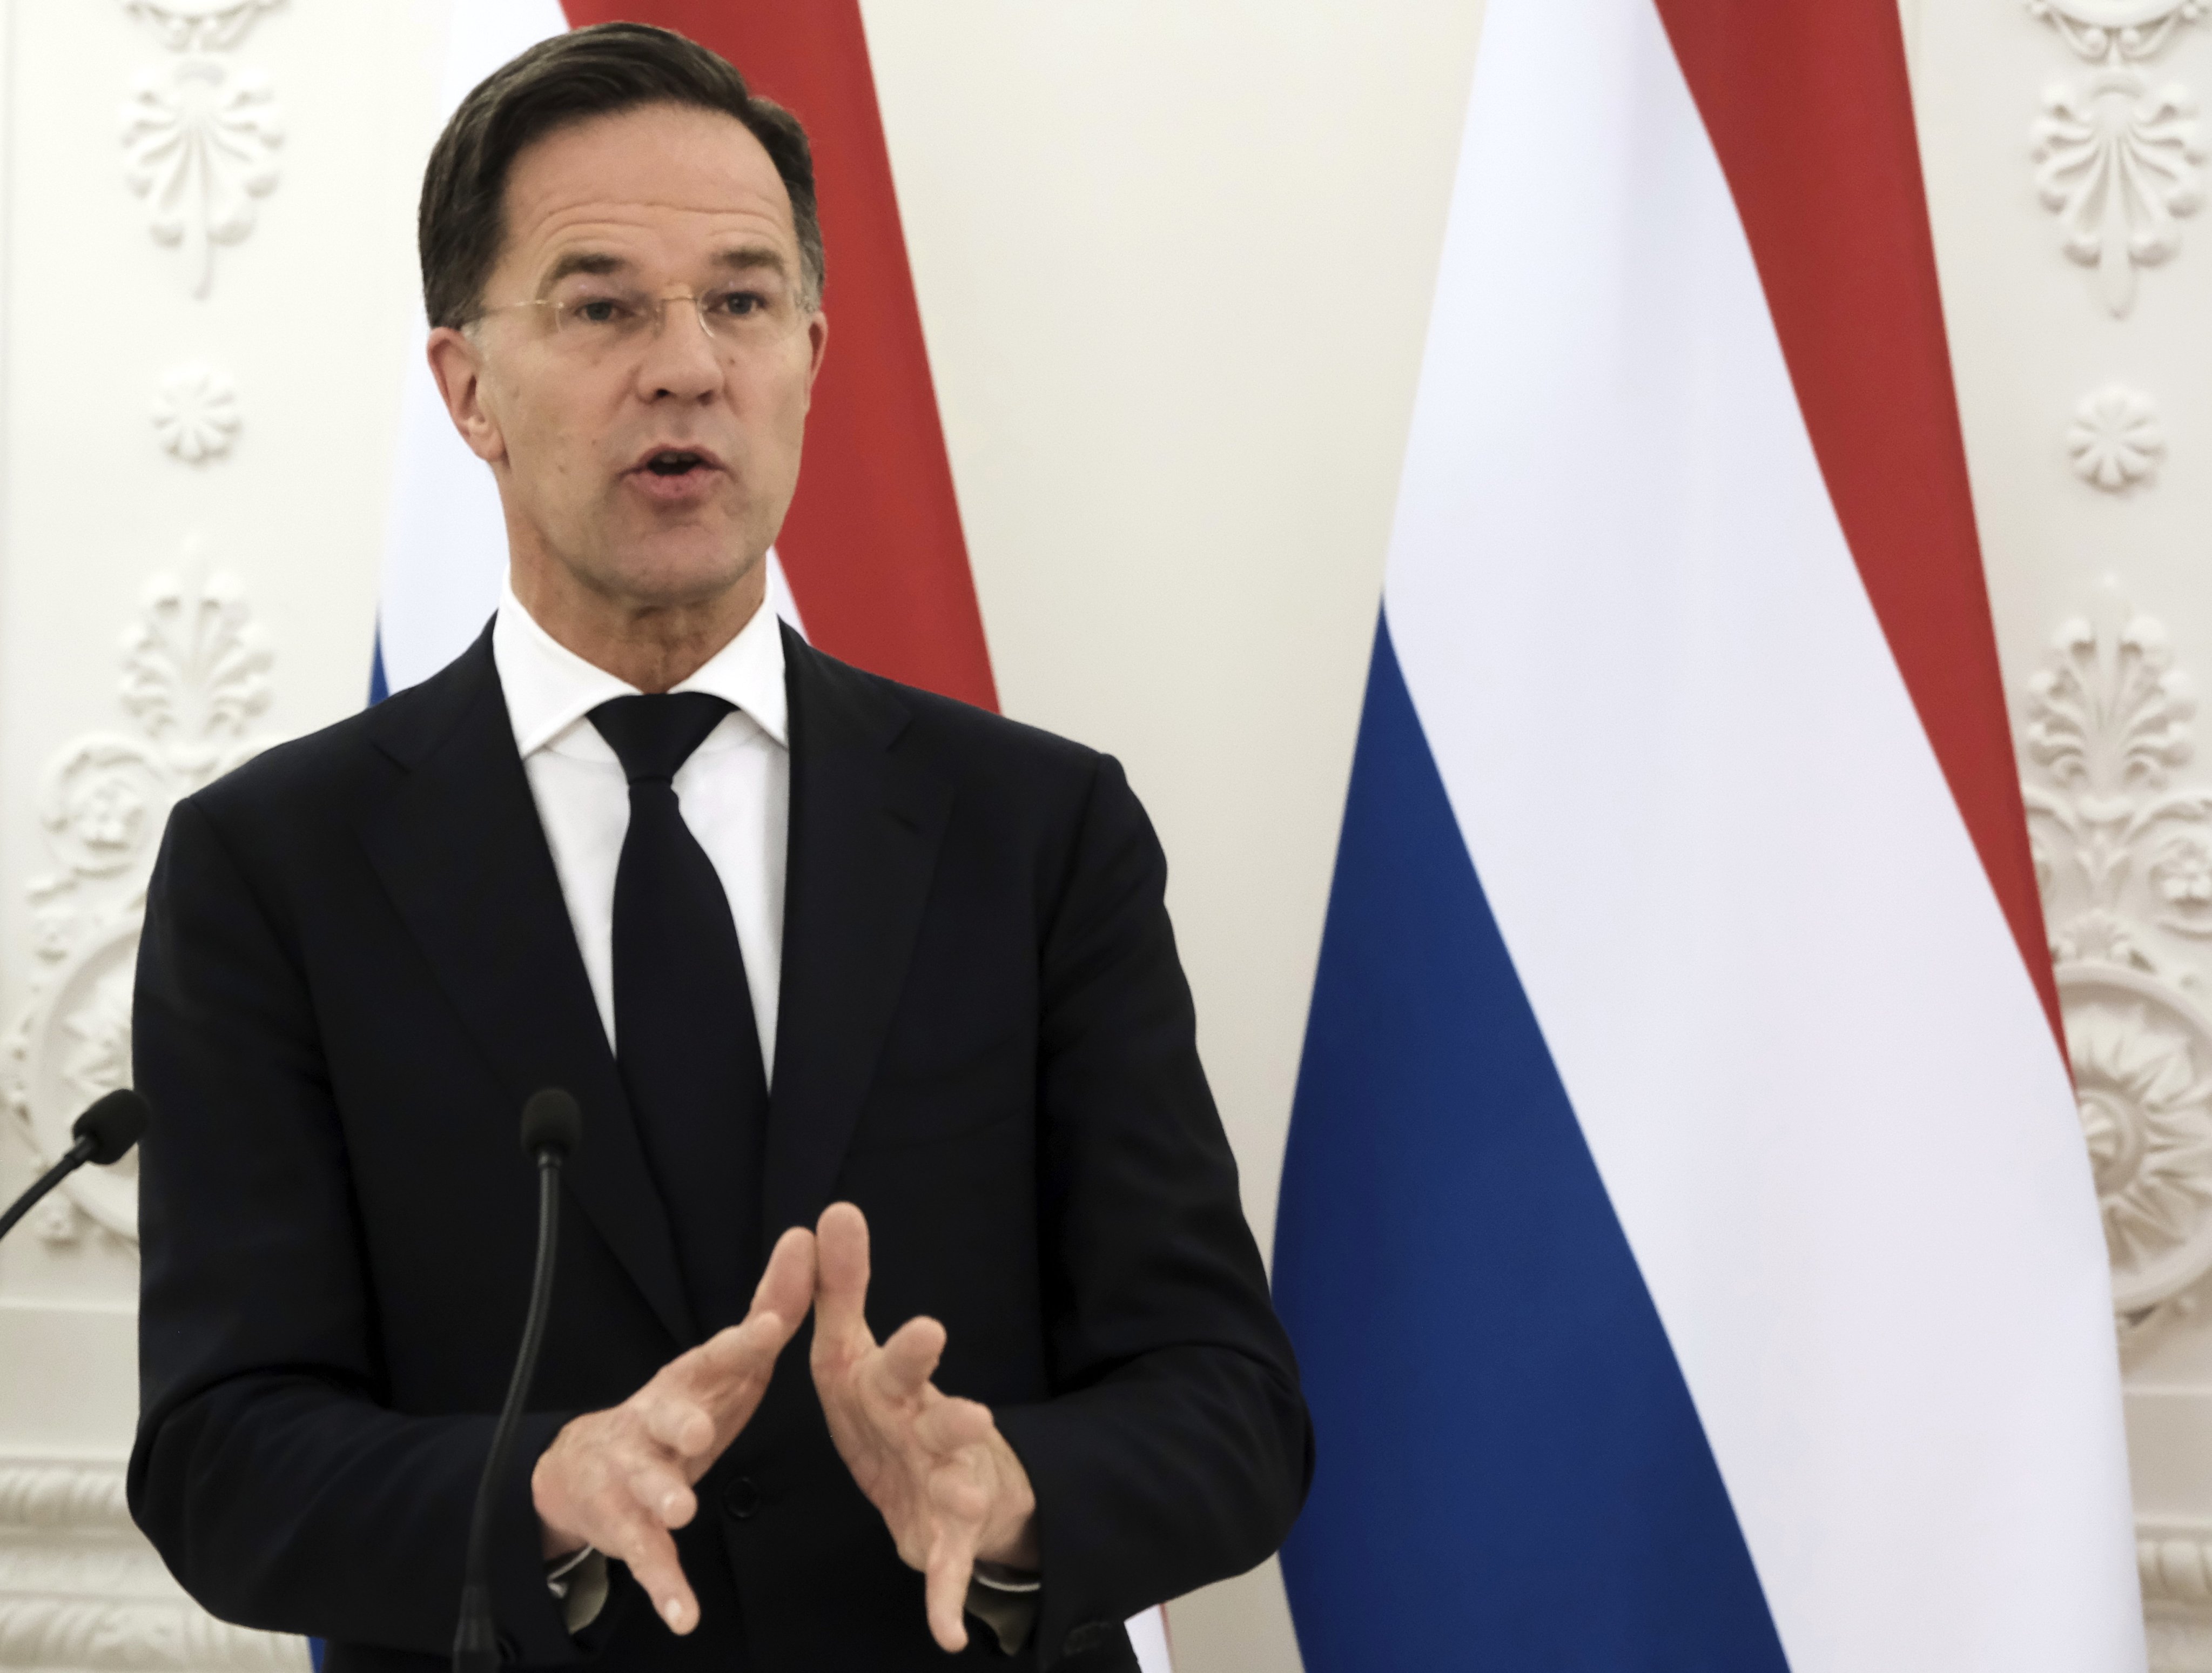 Dutch Prime Minister Mark Rutte attends a press conference in Vilnius. The Netherlands will provide Ukraine with €400 million in economic support and for repairing energy infrastructure that has again come under attack from Russia in recent days and weeks. Photo: EPA-EFE